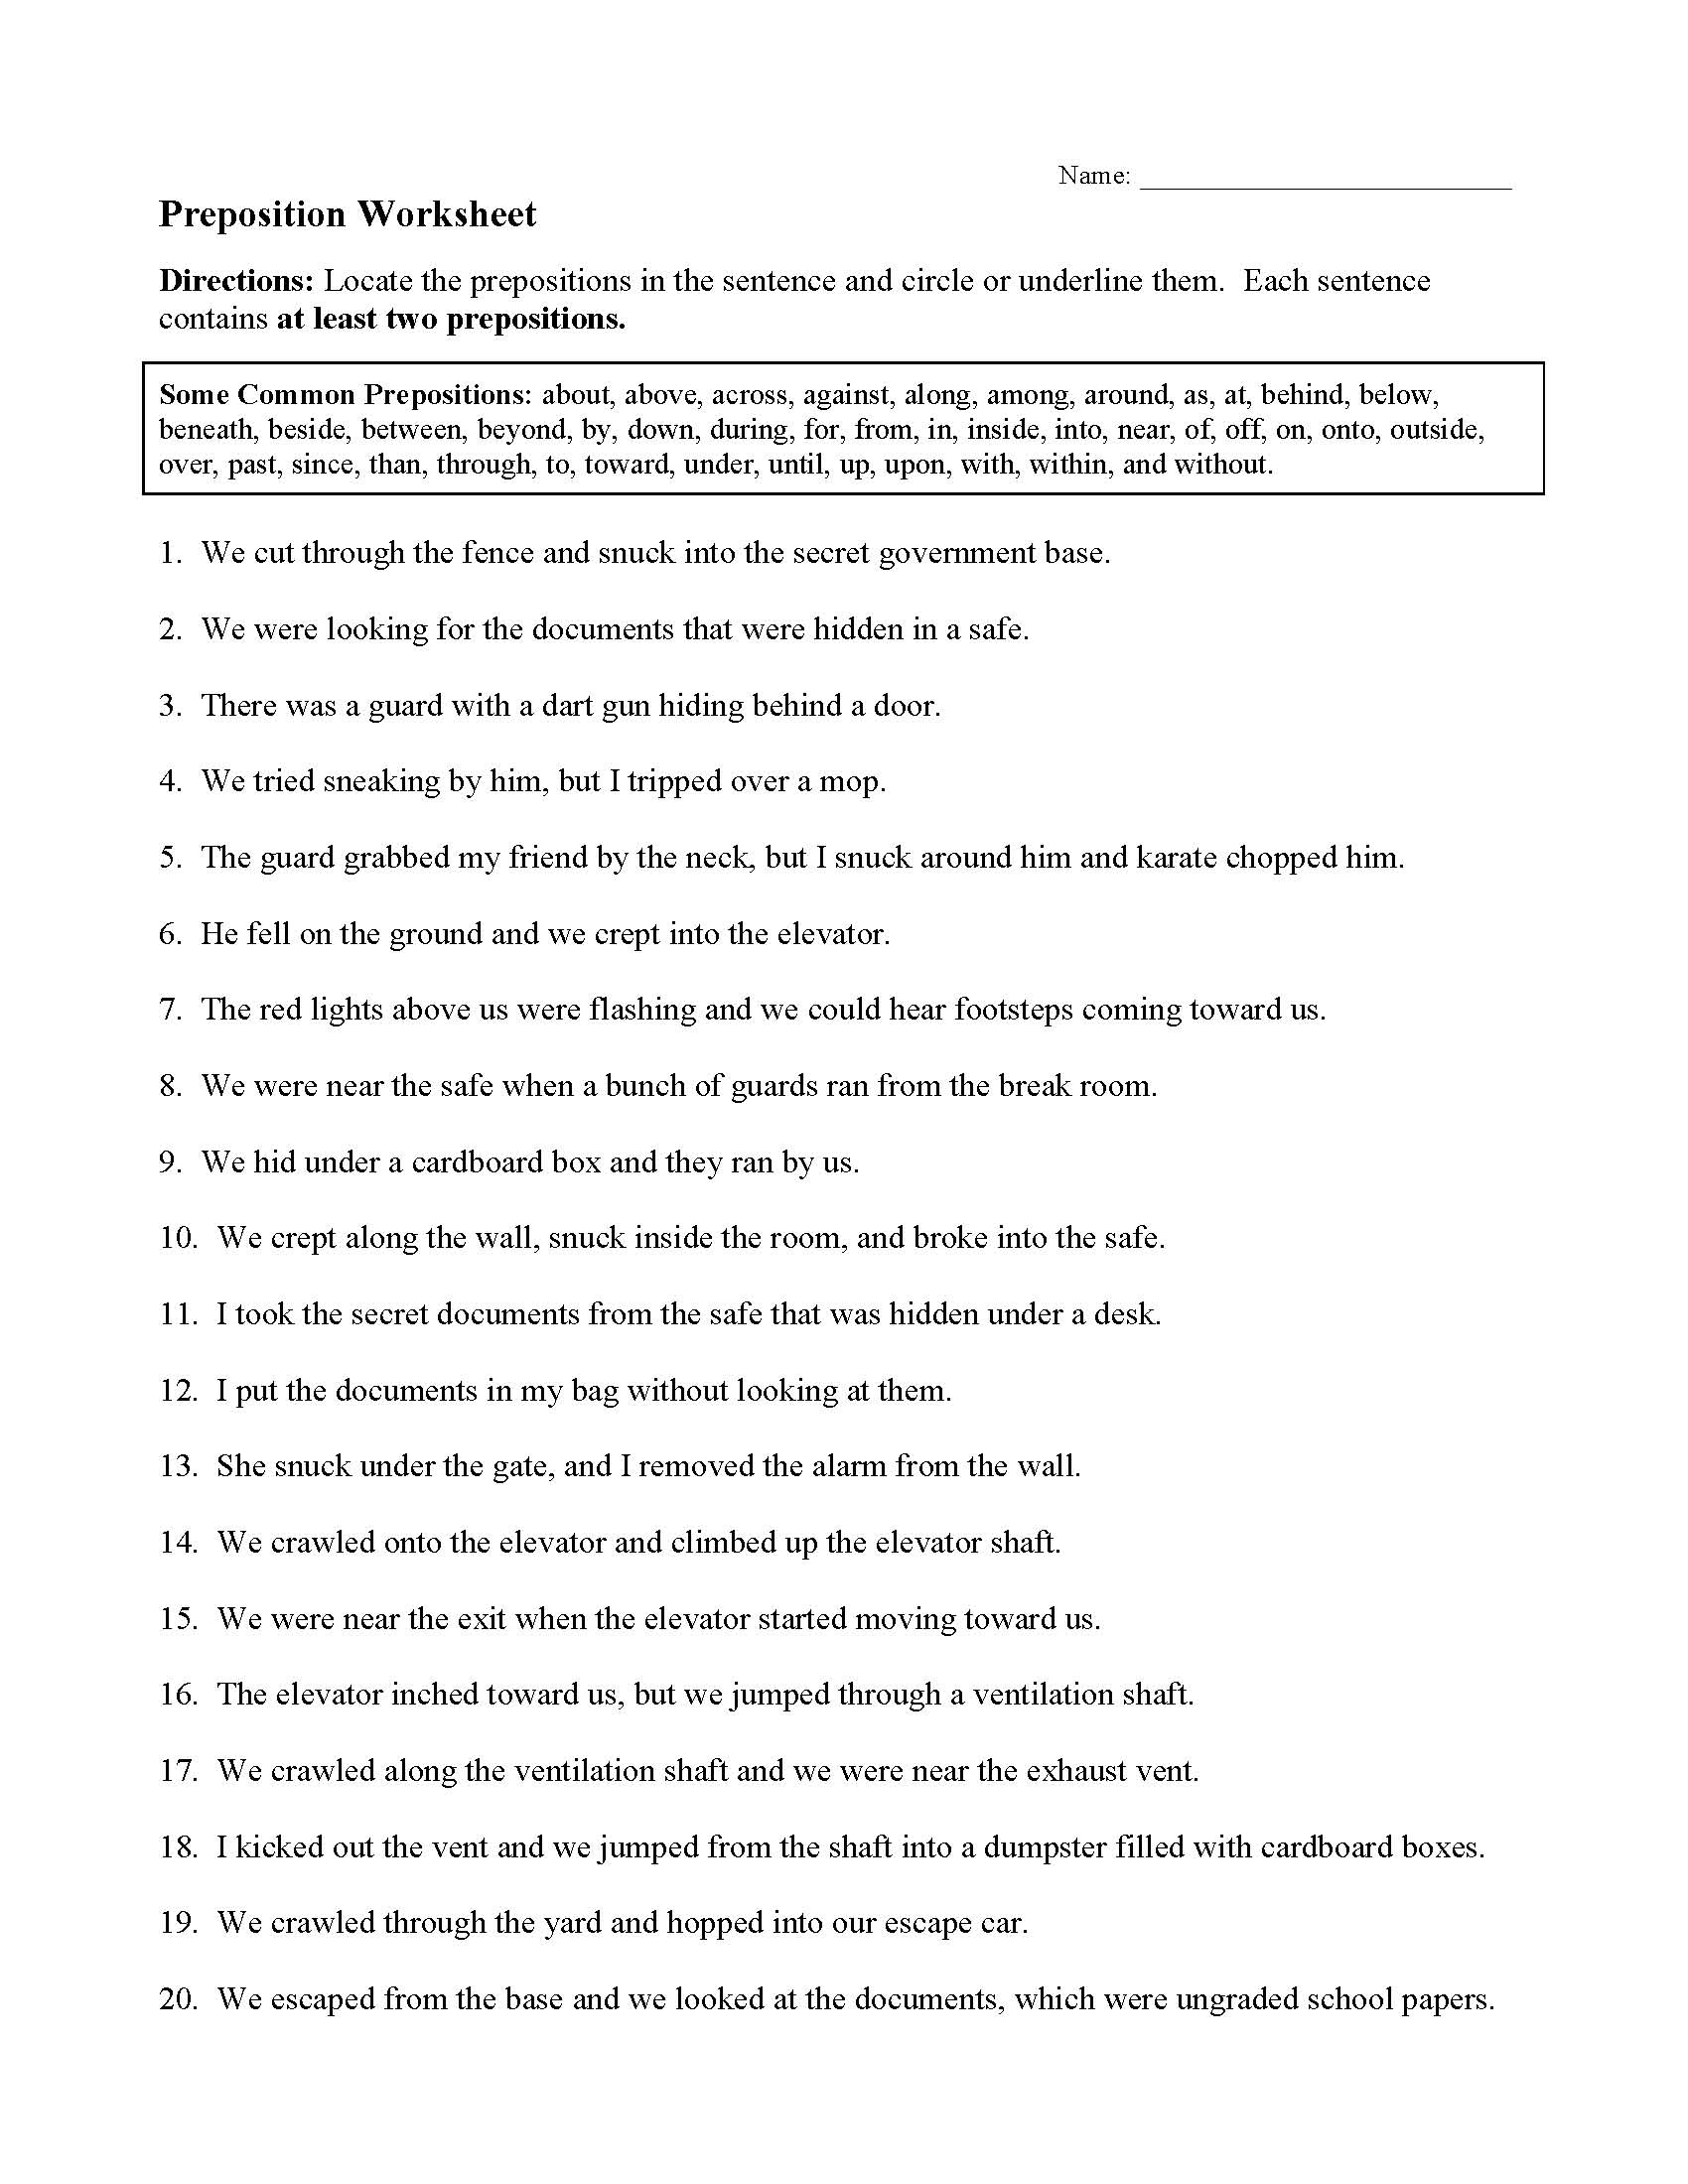 prepositions-worksheet-preview